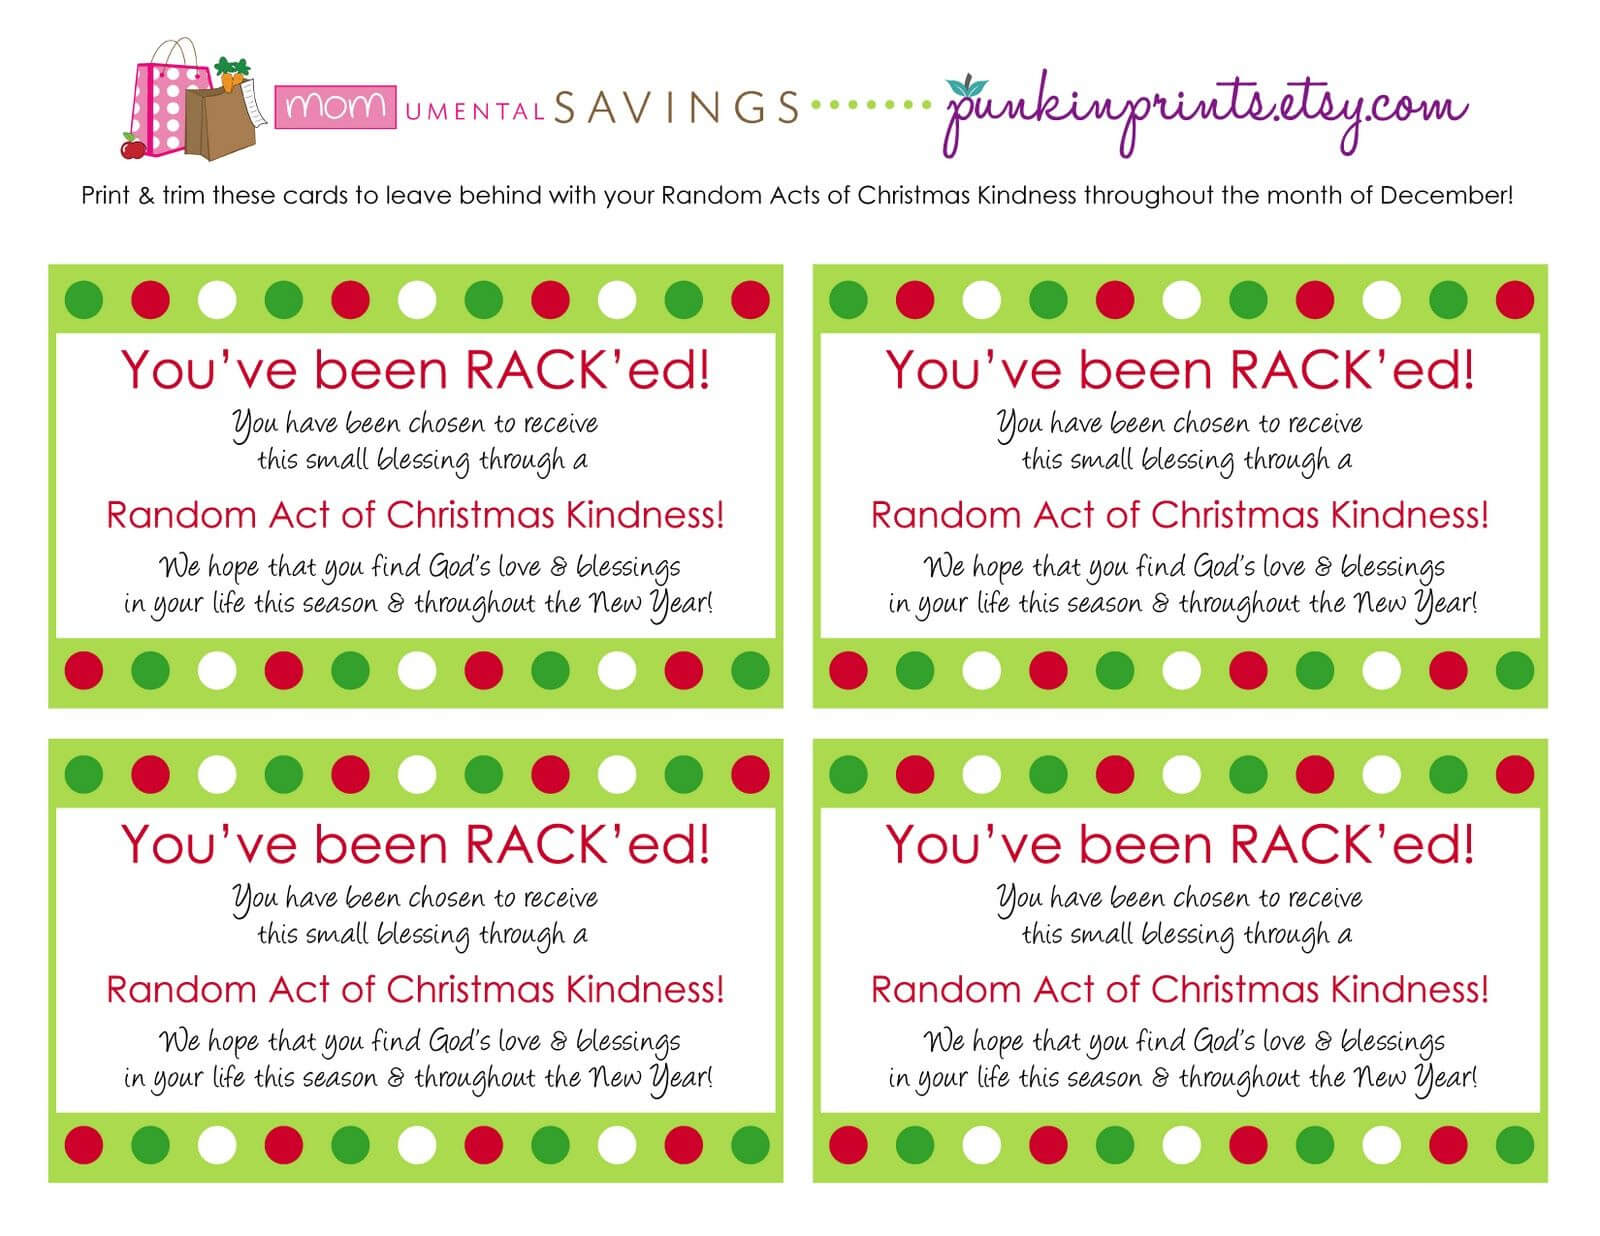 Random Act Of Christmas Kindness Cards | Get The Rack'd Pertaining To Random Acts Of Kindness Cards Templates